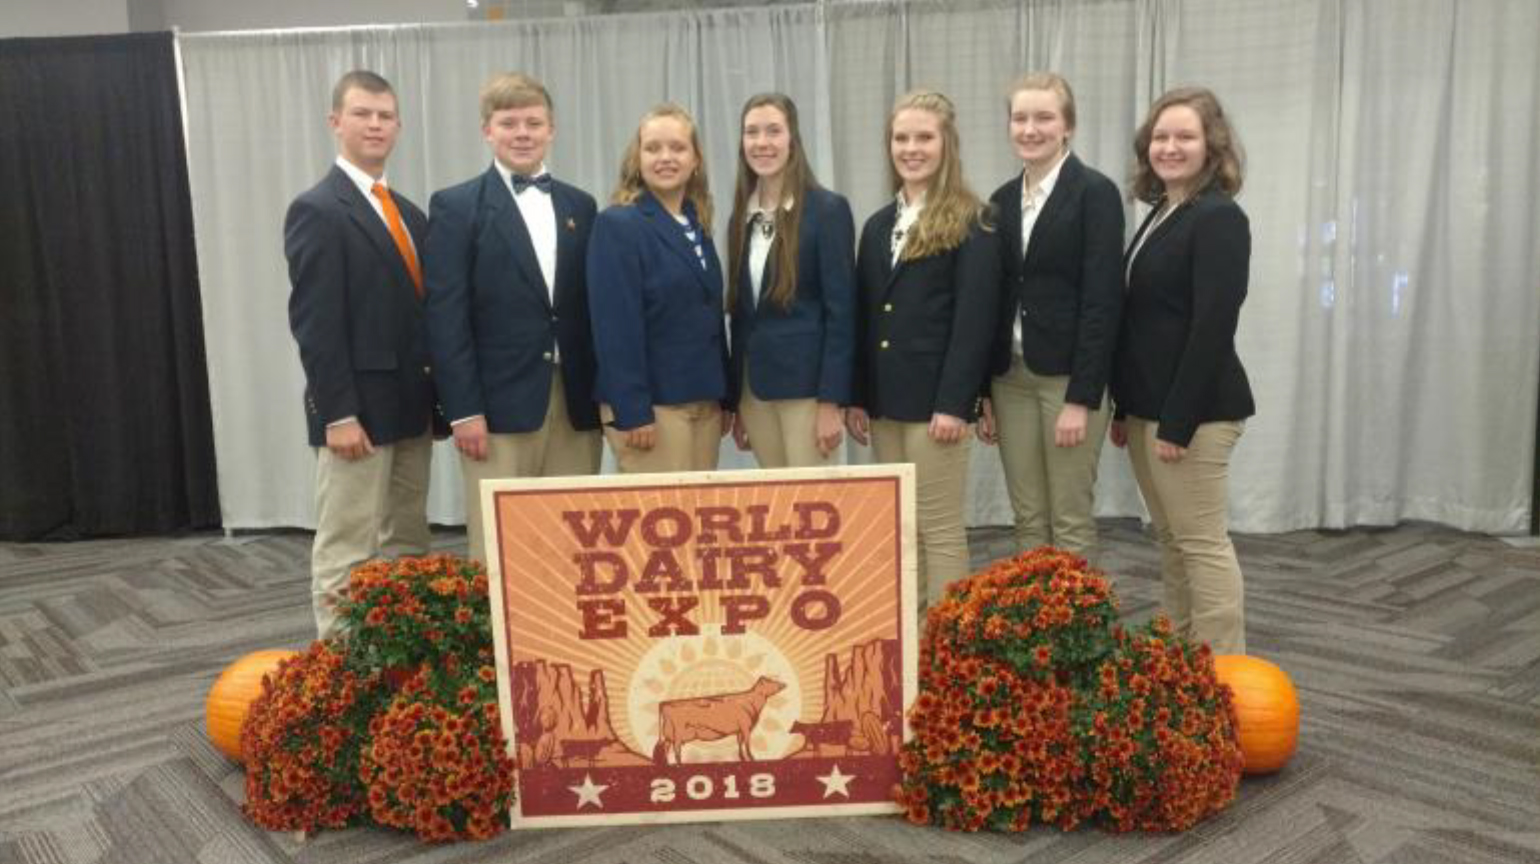 LINCOLN COUNTY DAIRY TEAM COMPETES IN NATIONAL CONTEST